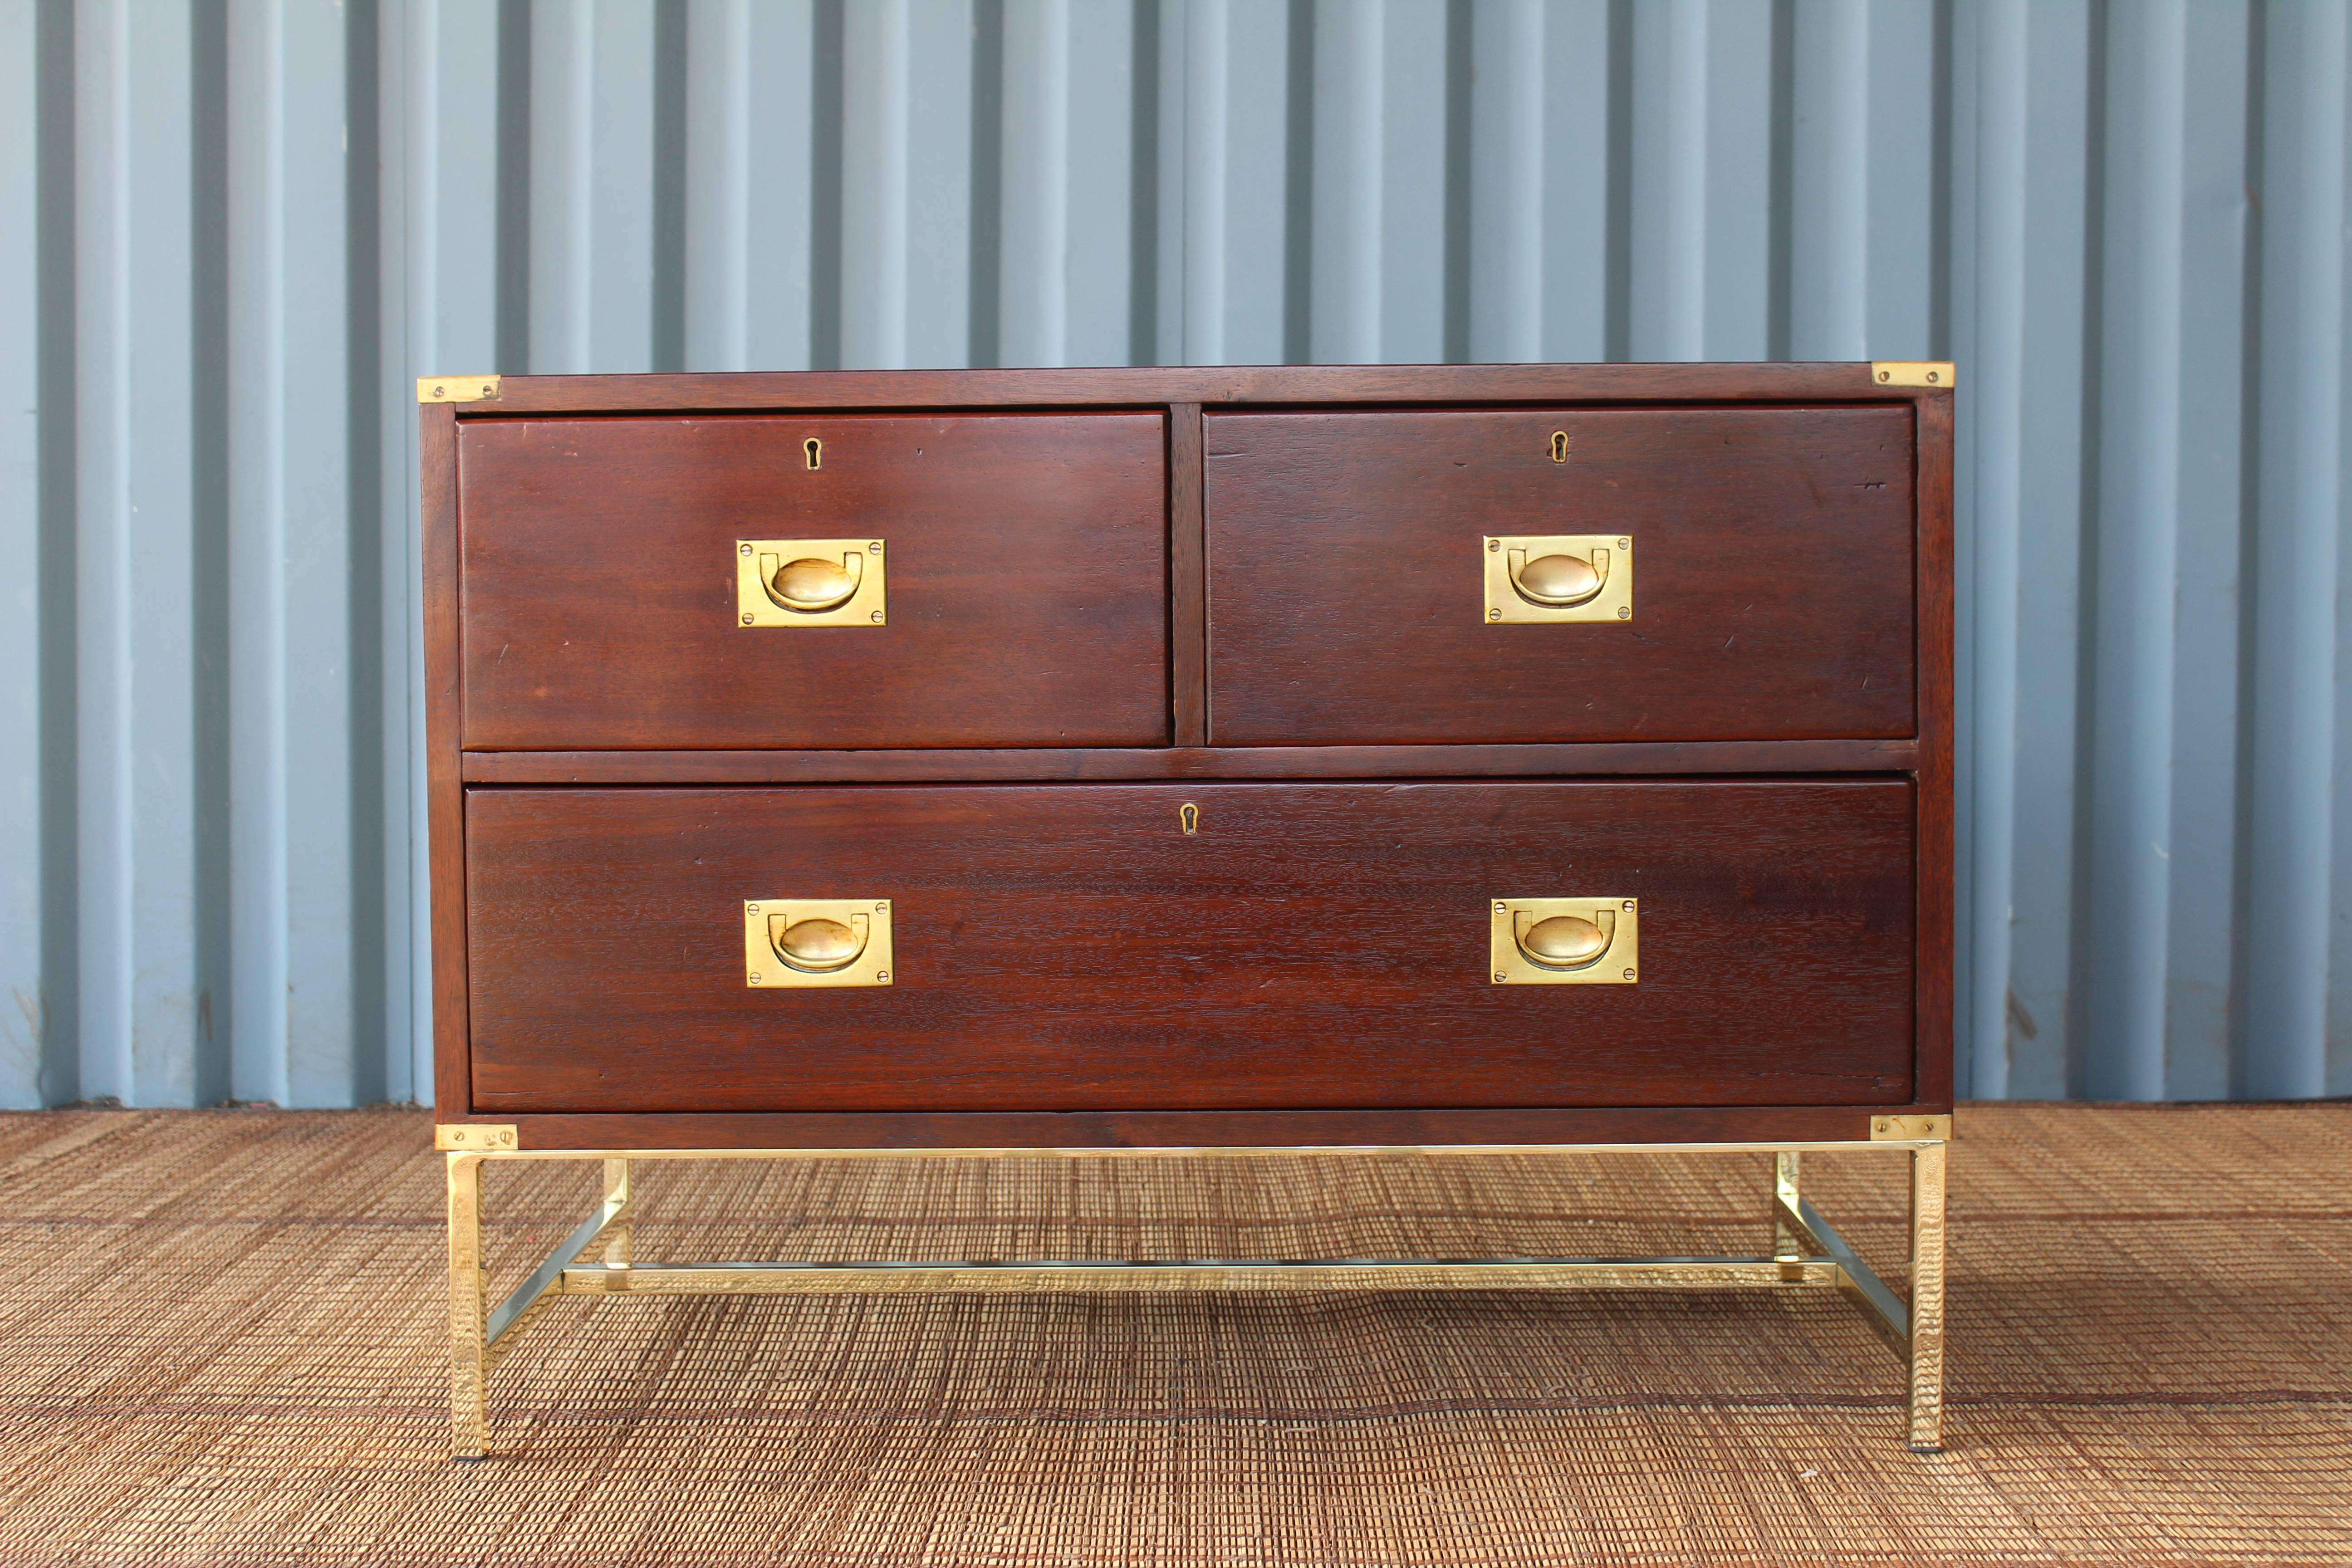 Pair of 19th century English Campaign chests in solid mahogany. Suitable for bedside tables. The pair have been professionally refinished and feature custom-made brass plated bases.